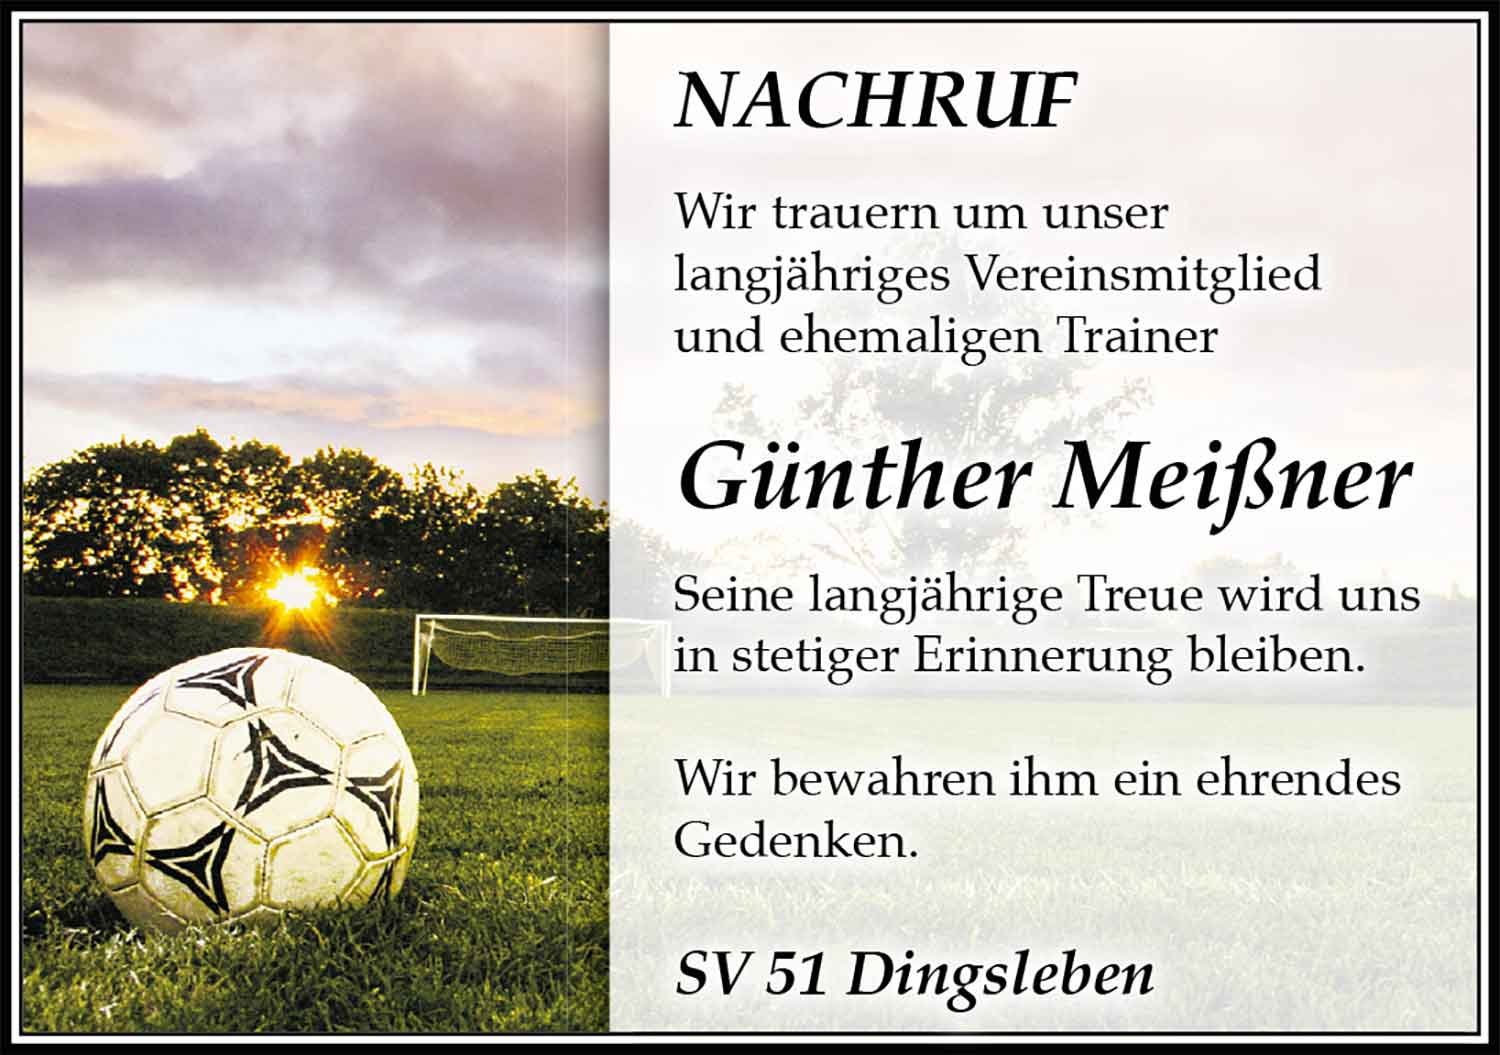 Nachruf_Guenther_Meissner_15_22